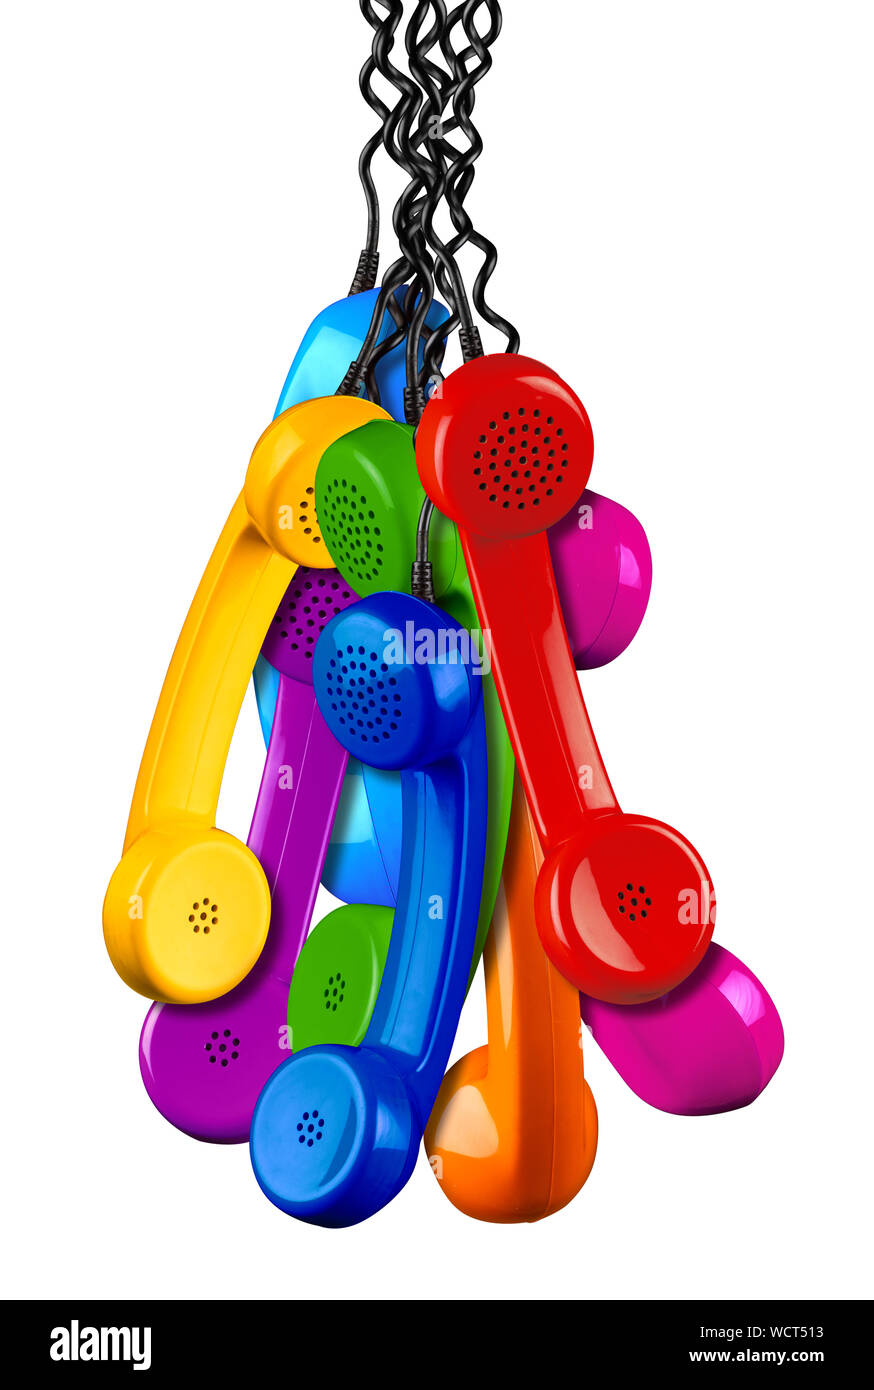 bunch of colorful rainbow colored old fashioned retro phone reciever with black telephone wire isolated on white background, business communication su Stock Photo